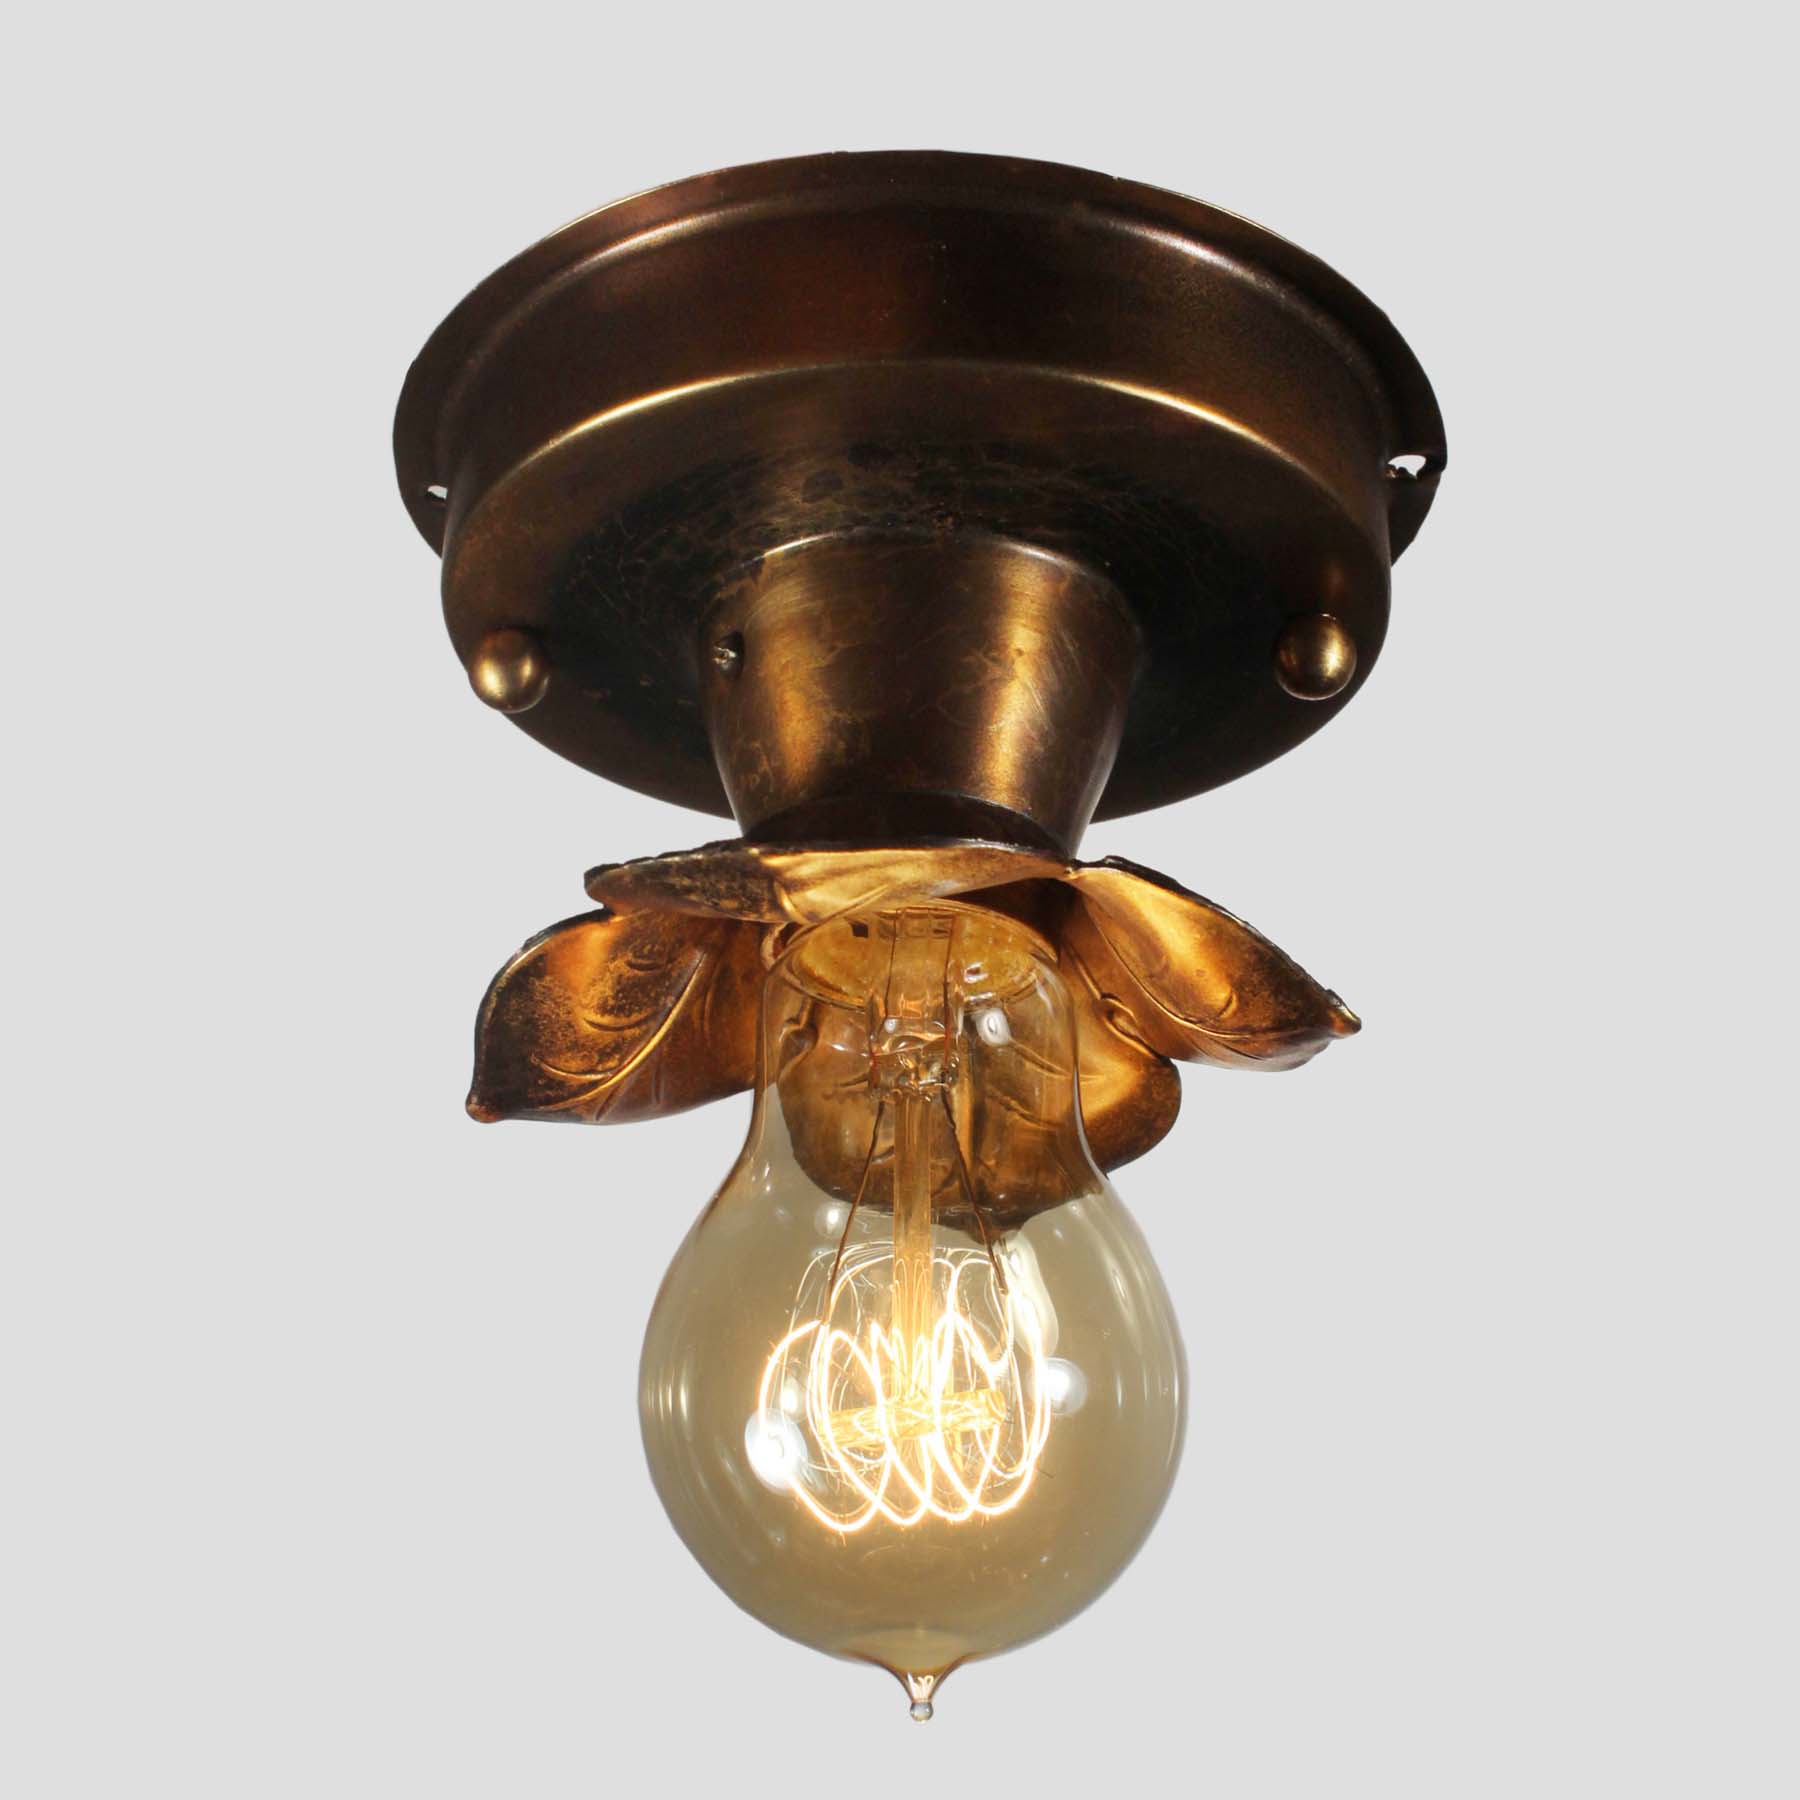 SOLD Brass Flush-Mount Lights with Exposed Bulbs, Antique Lighting-67131